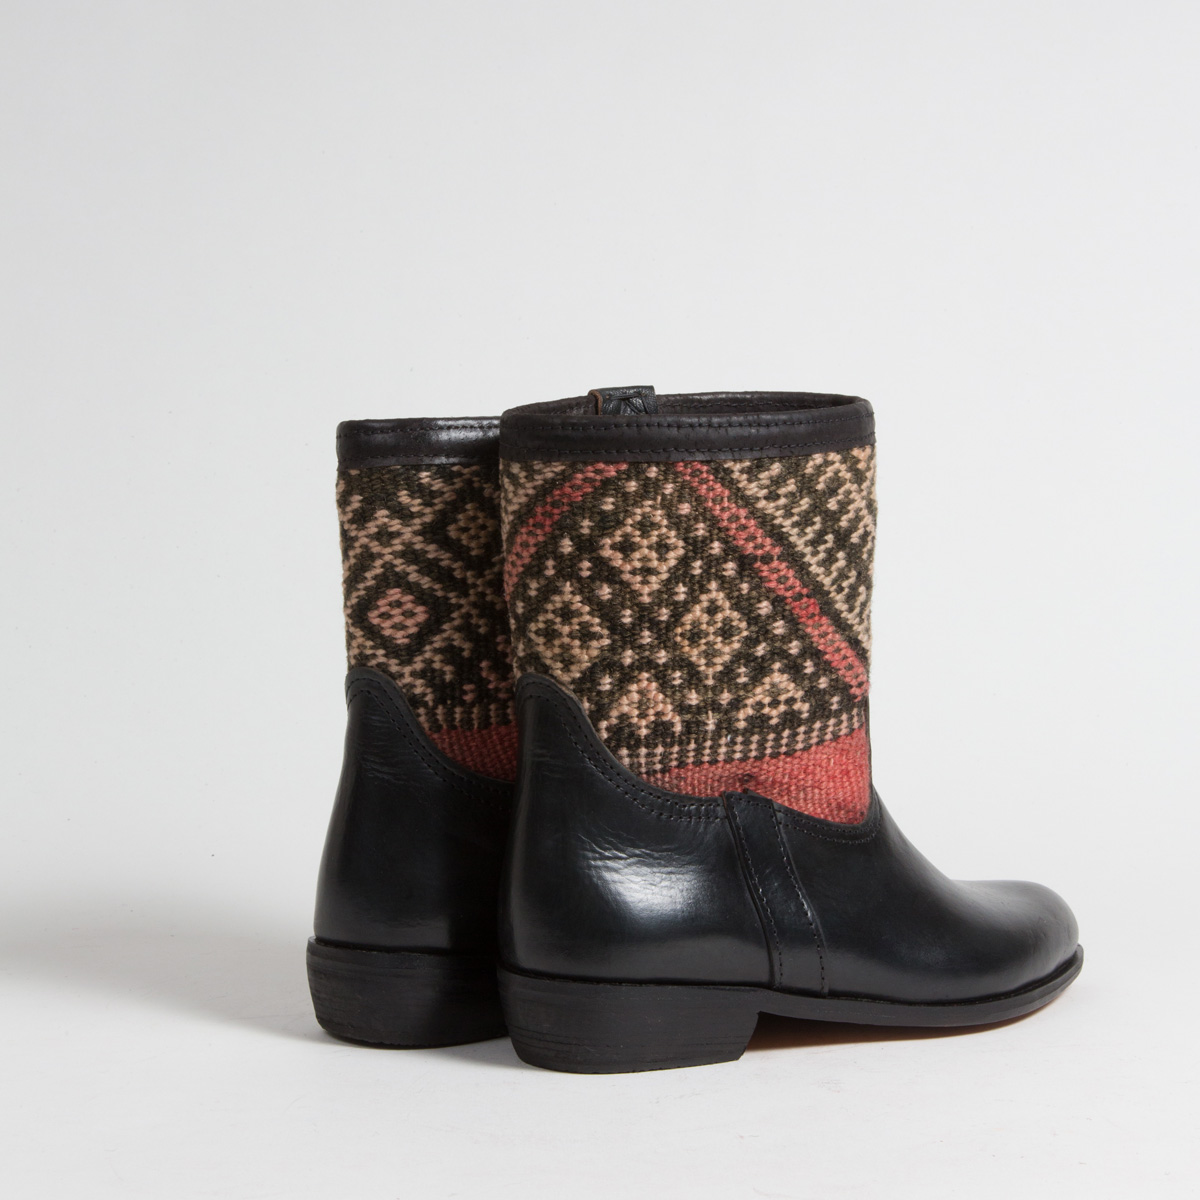 Bottines Kilim cuir mababouche artisanales (Réf. RPN14-39)